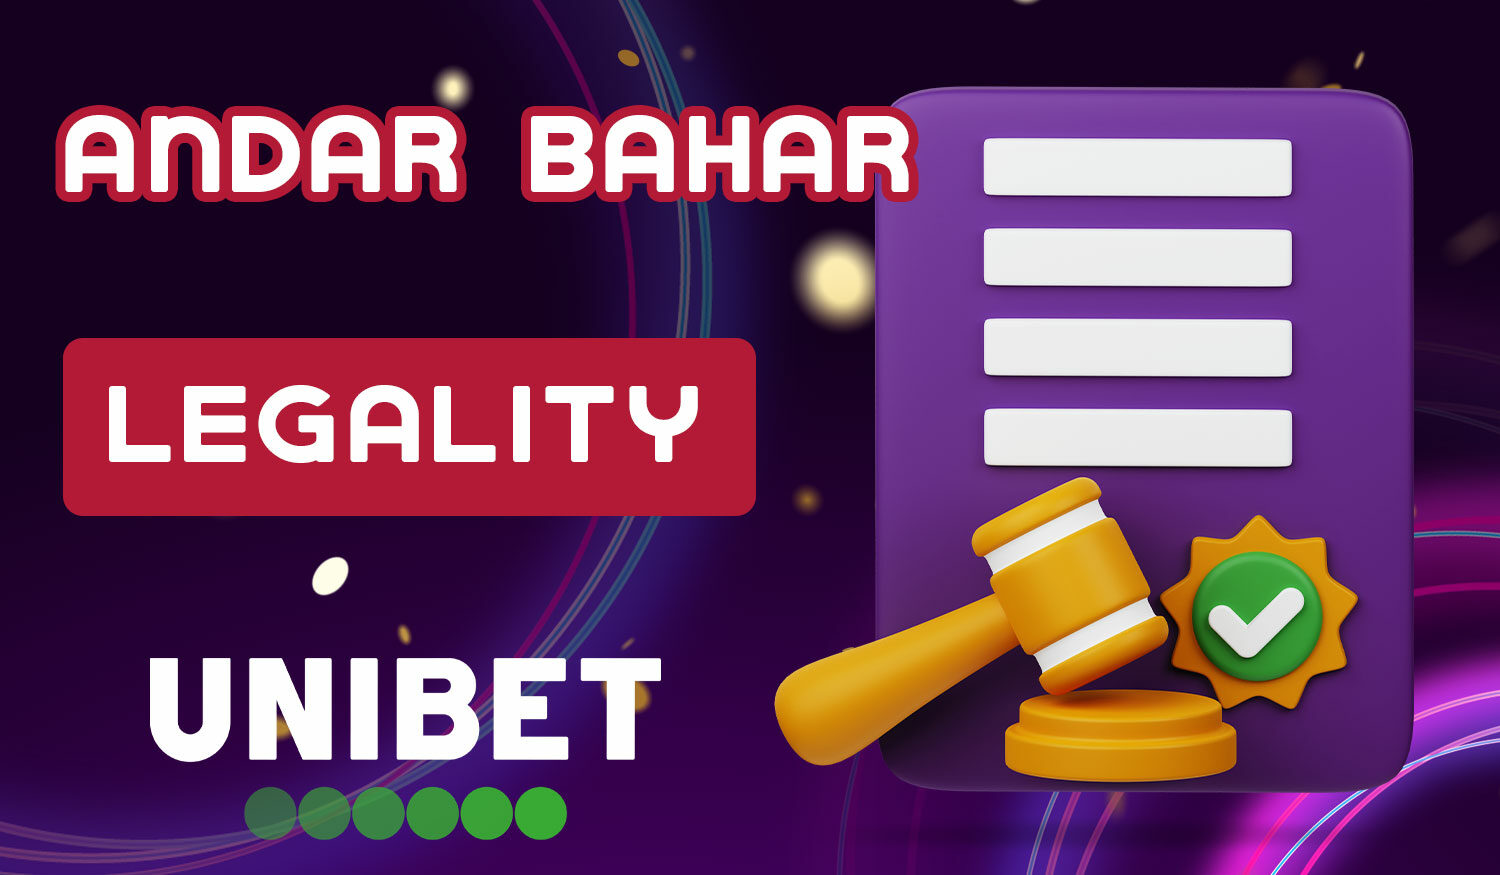 Indian players should familiarize themselves with the rules and regulations of their state before participating in online betting on the Unibet platform